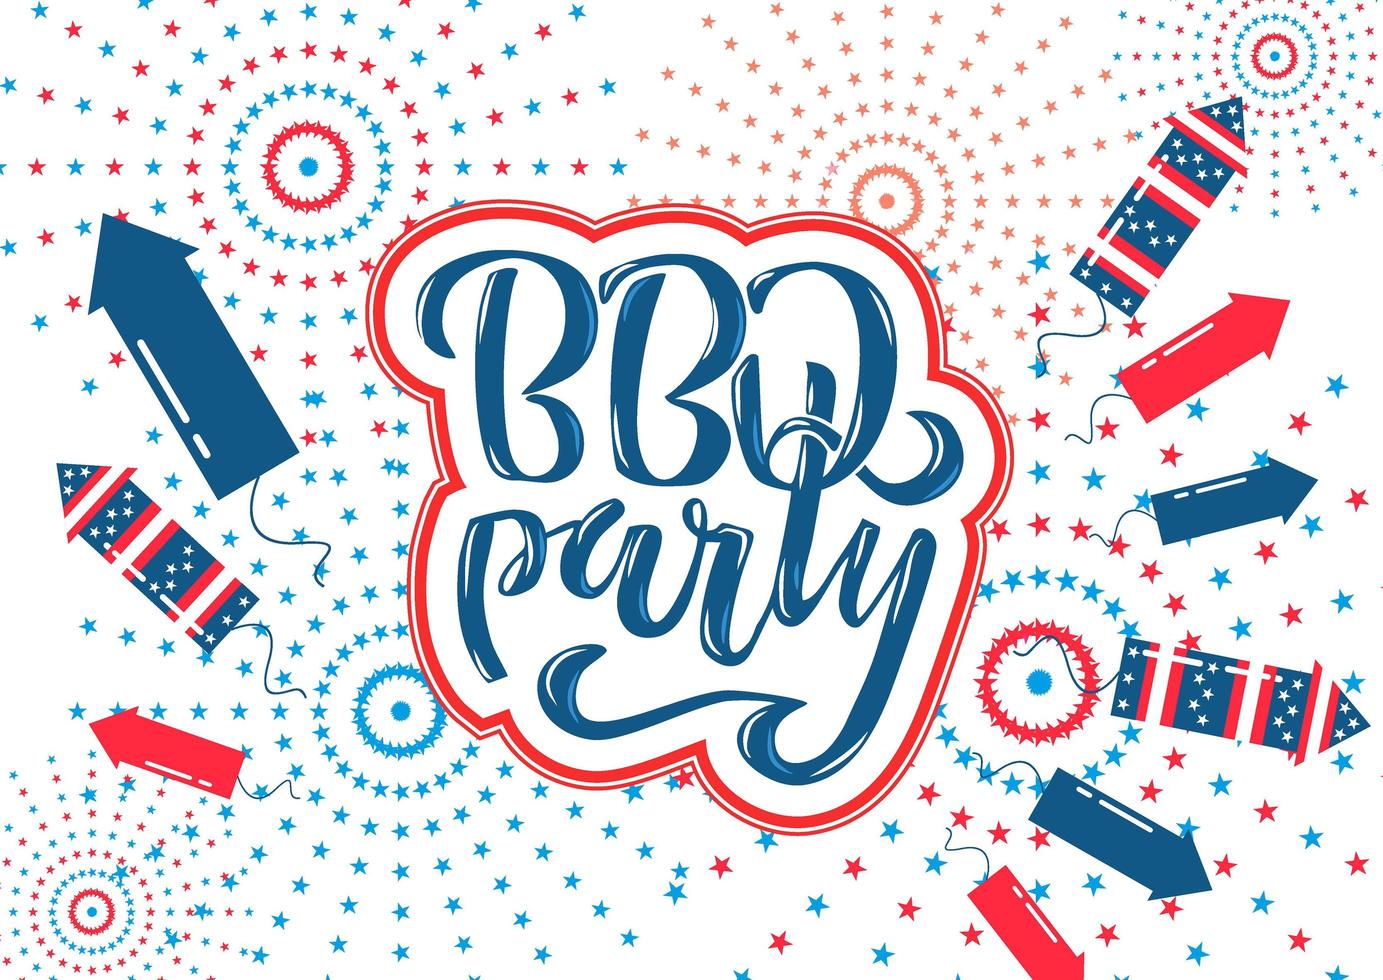 July 4th BBQ Party lettering invitation to American independence day barbeque with July 4th decorations stars, flags, fireworks on white background. Vector hand drawn illustration.